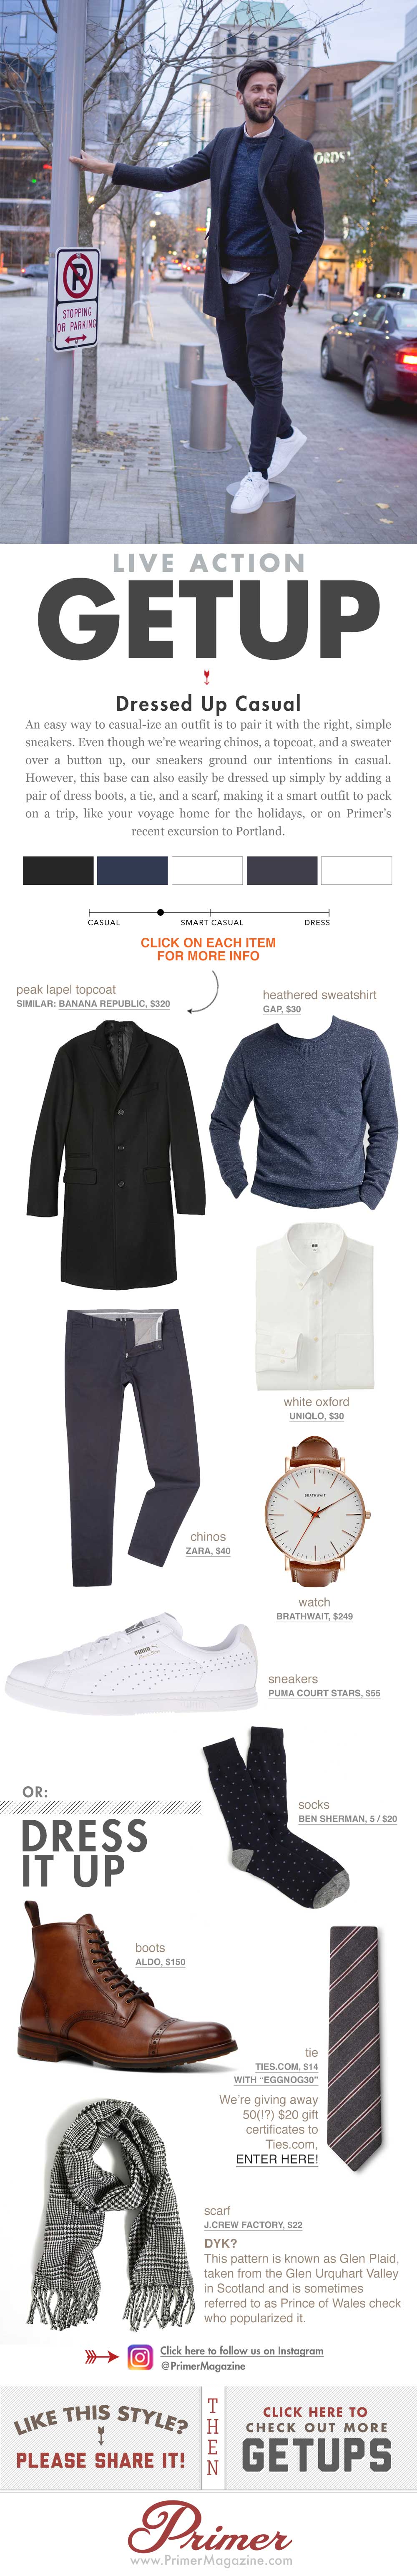 The Getup Dressed up Casual - inspiration with topcoat, chinos, and sneakers